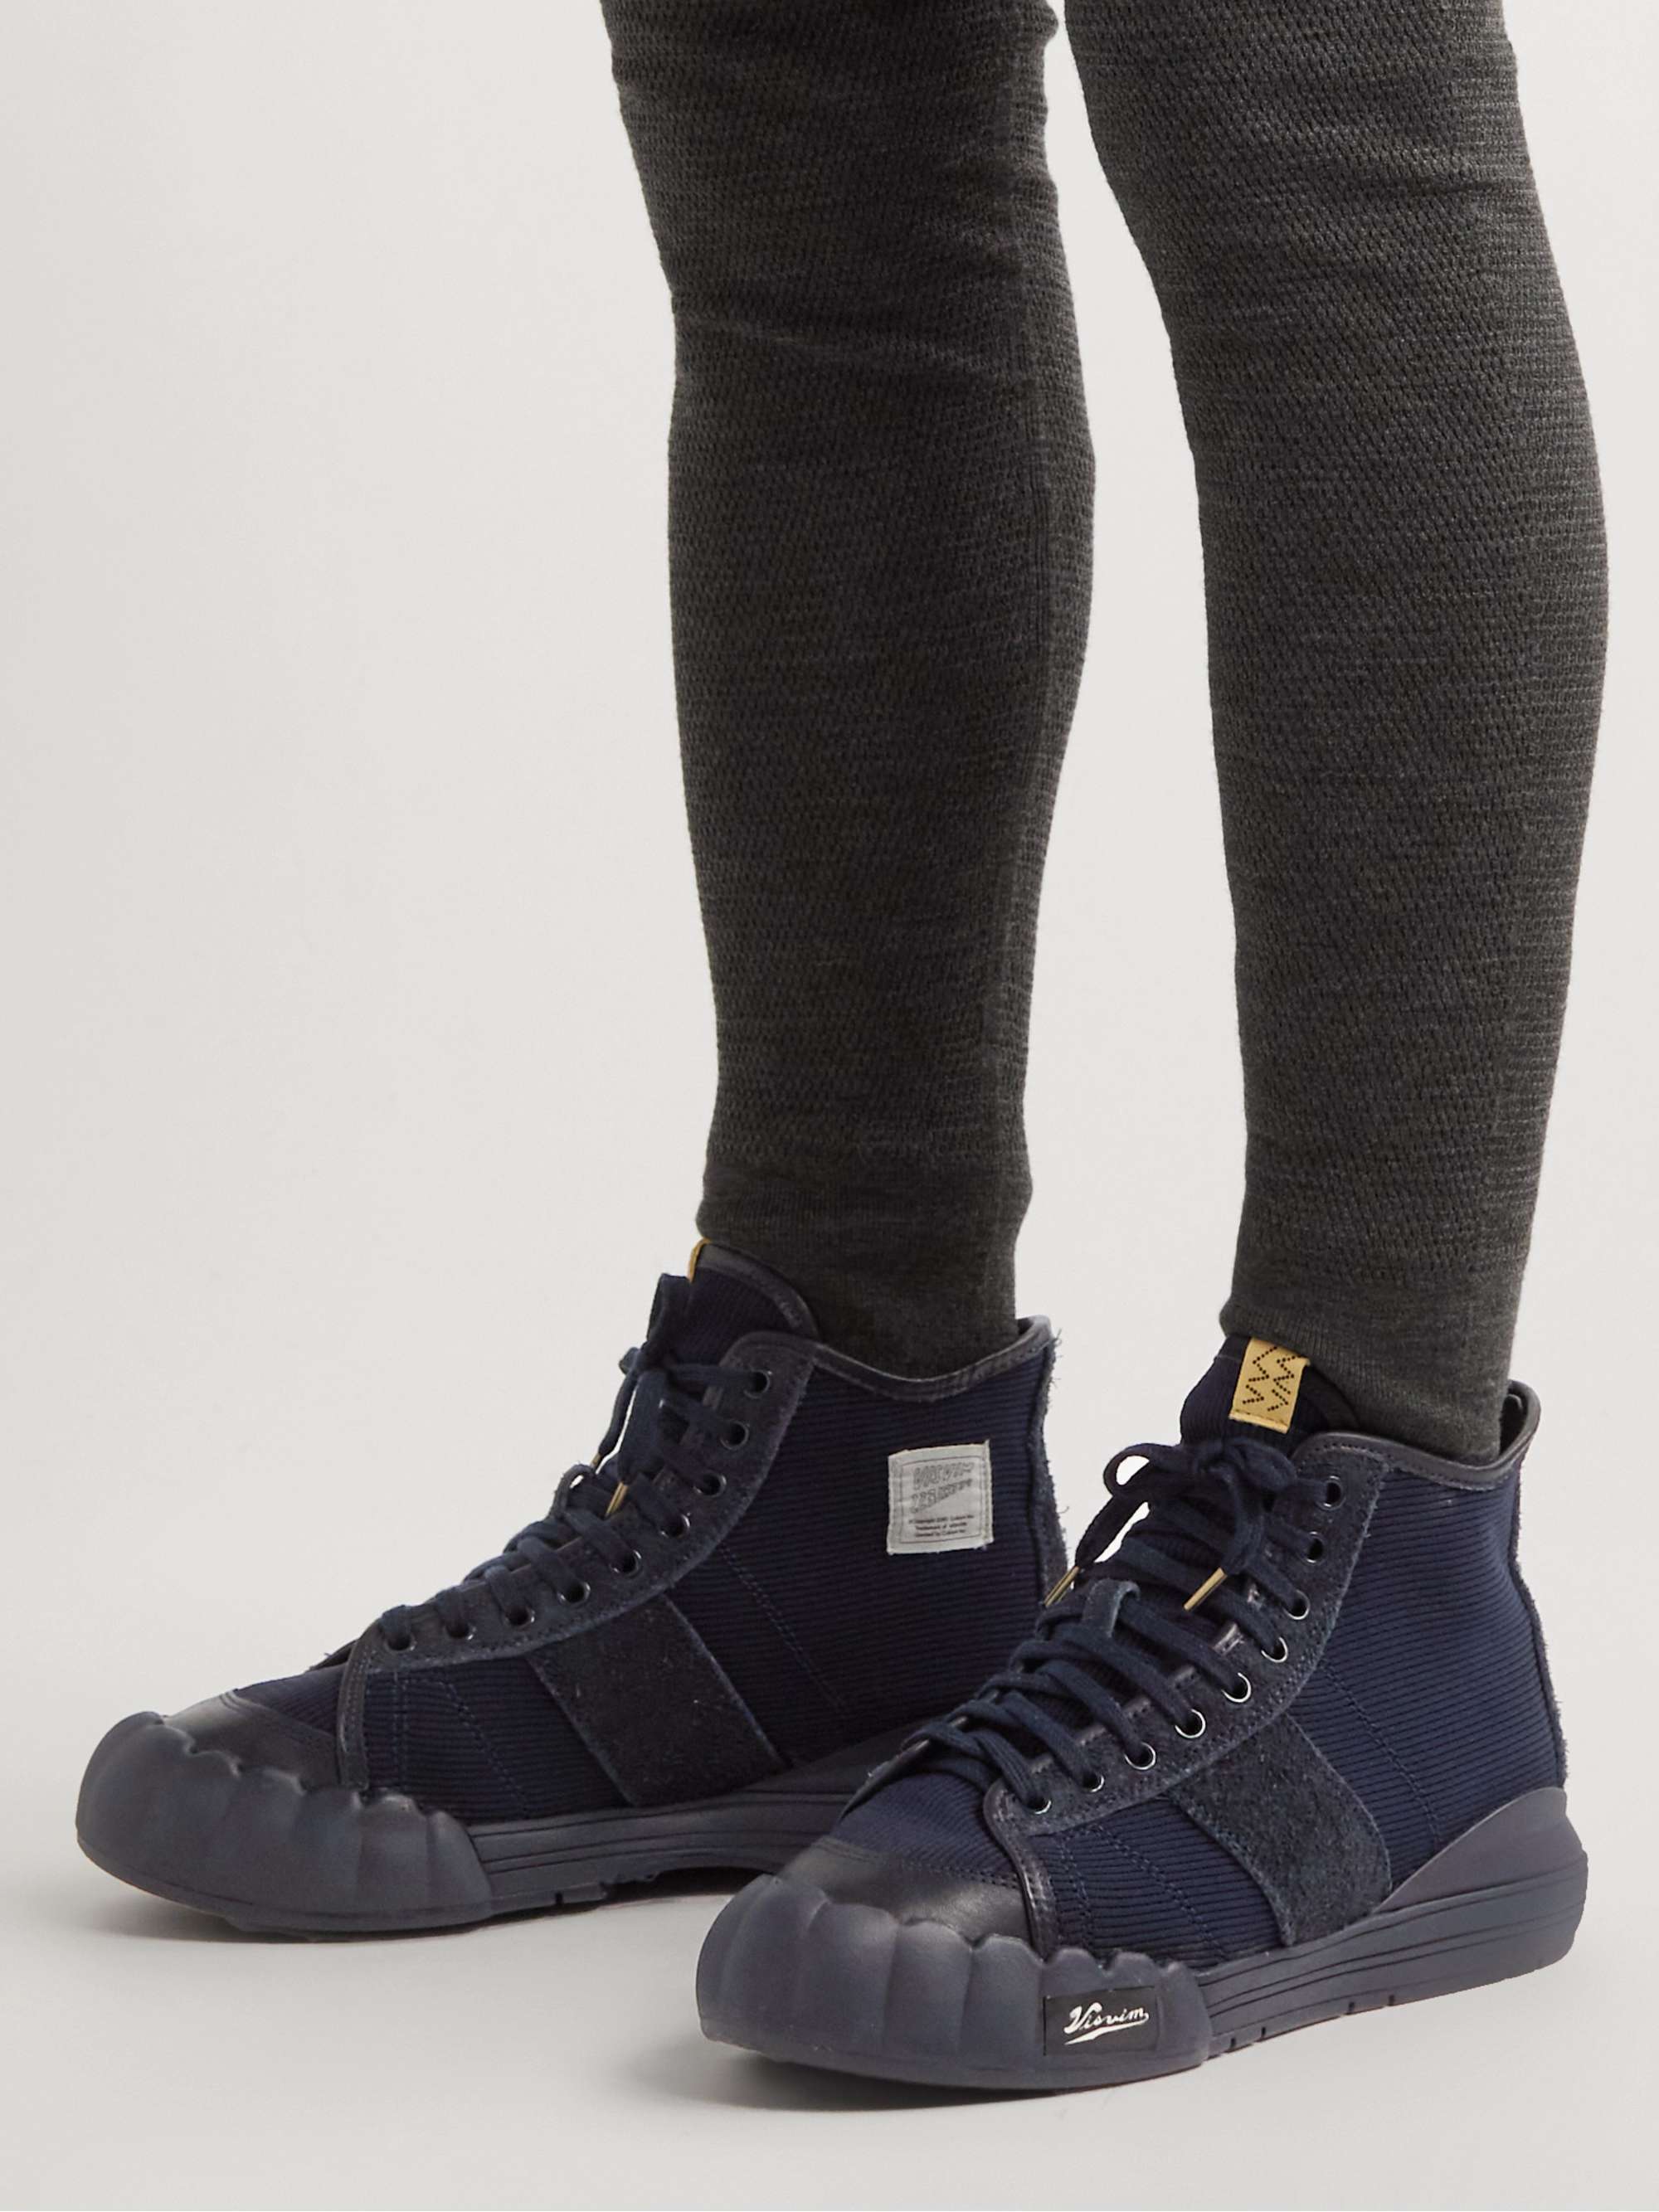 VISVIM Lanier Suede and Leather-Trimmed Canvas High-Top Sneakers